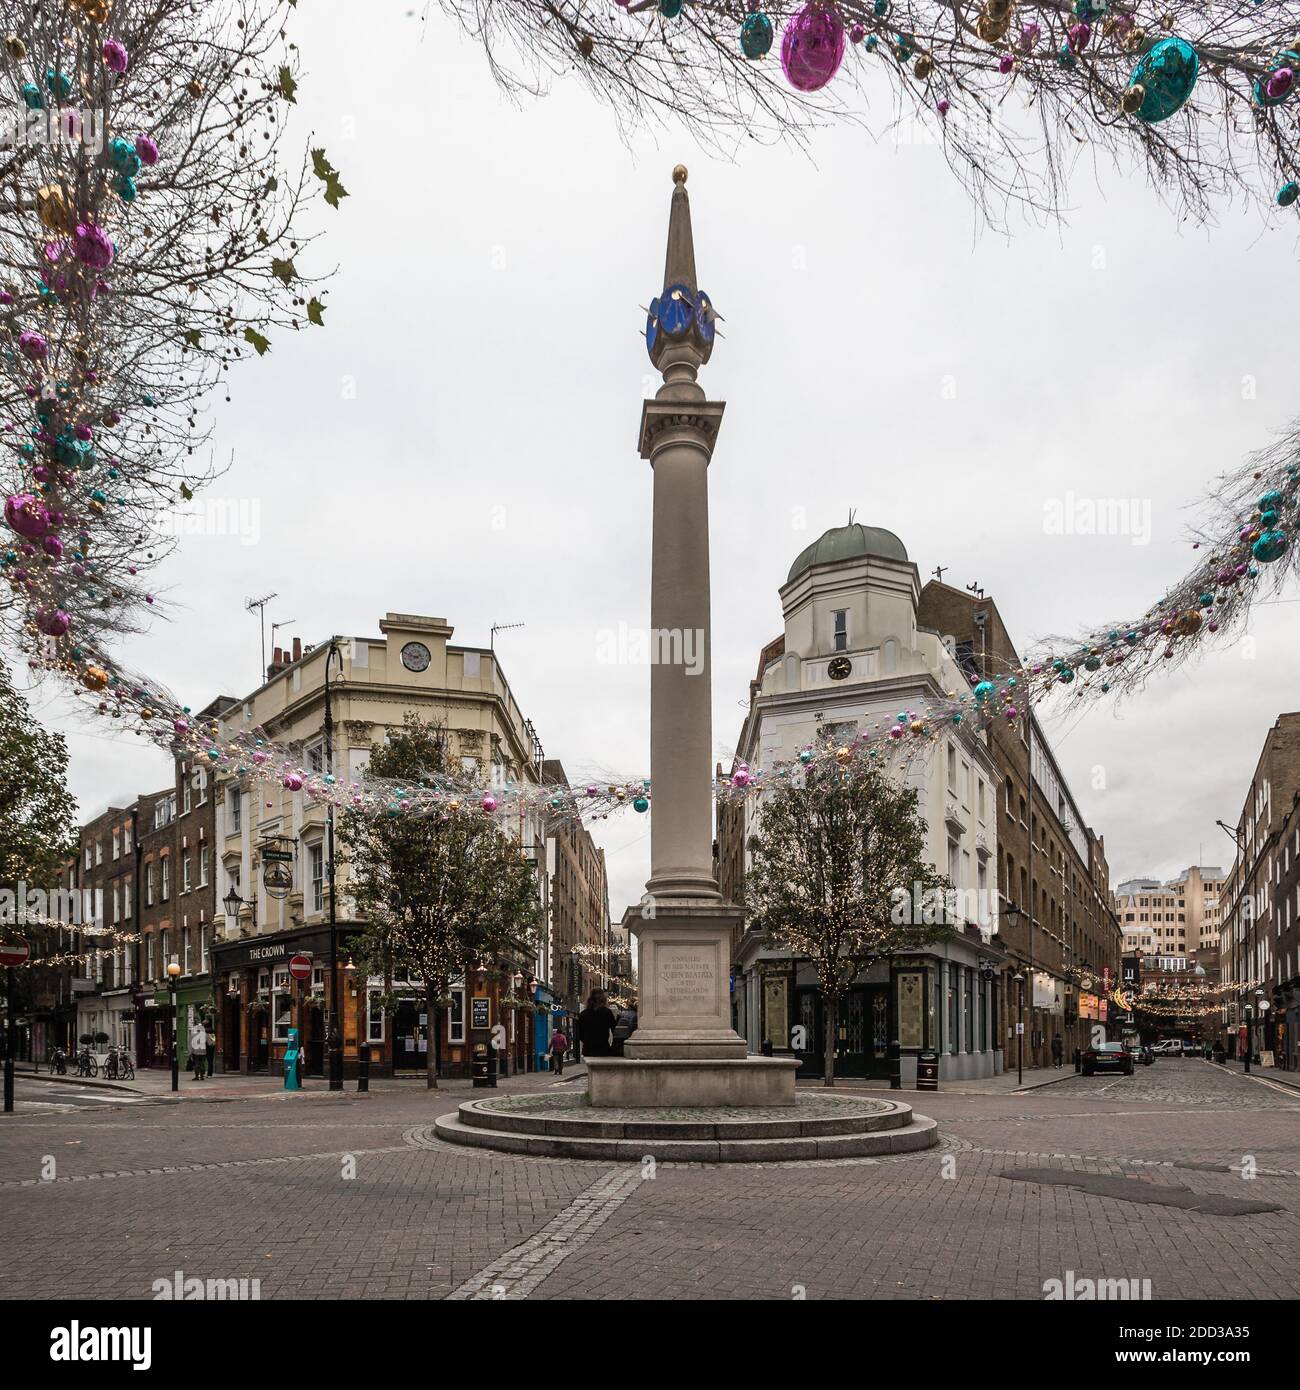 Christmas decorations go up at the famous tourist destination of Seven Dials in Covent Garden, London. Stock Photo